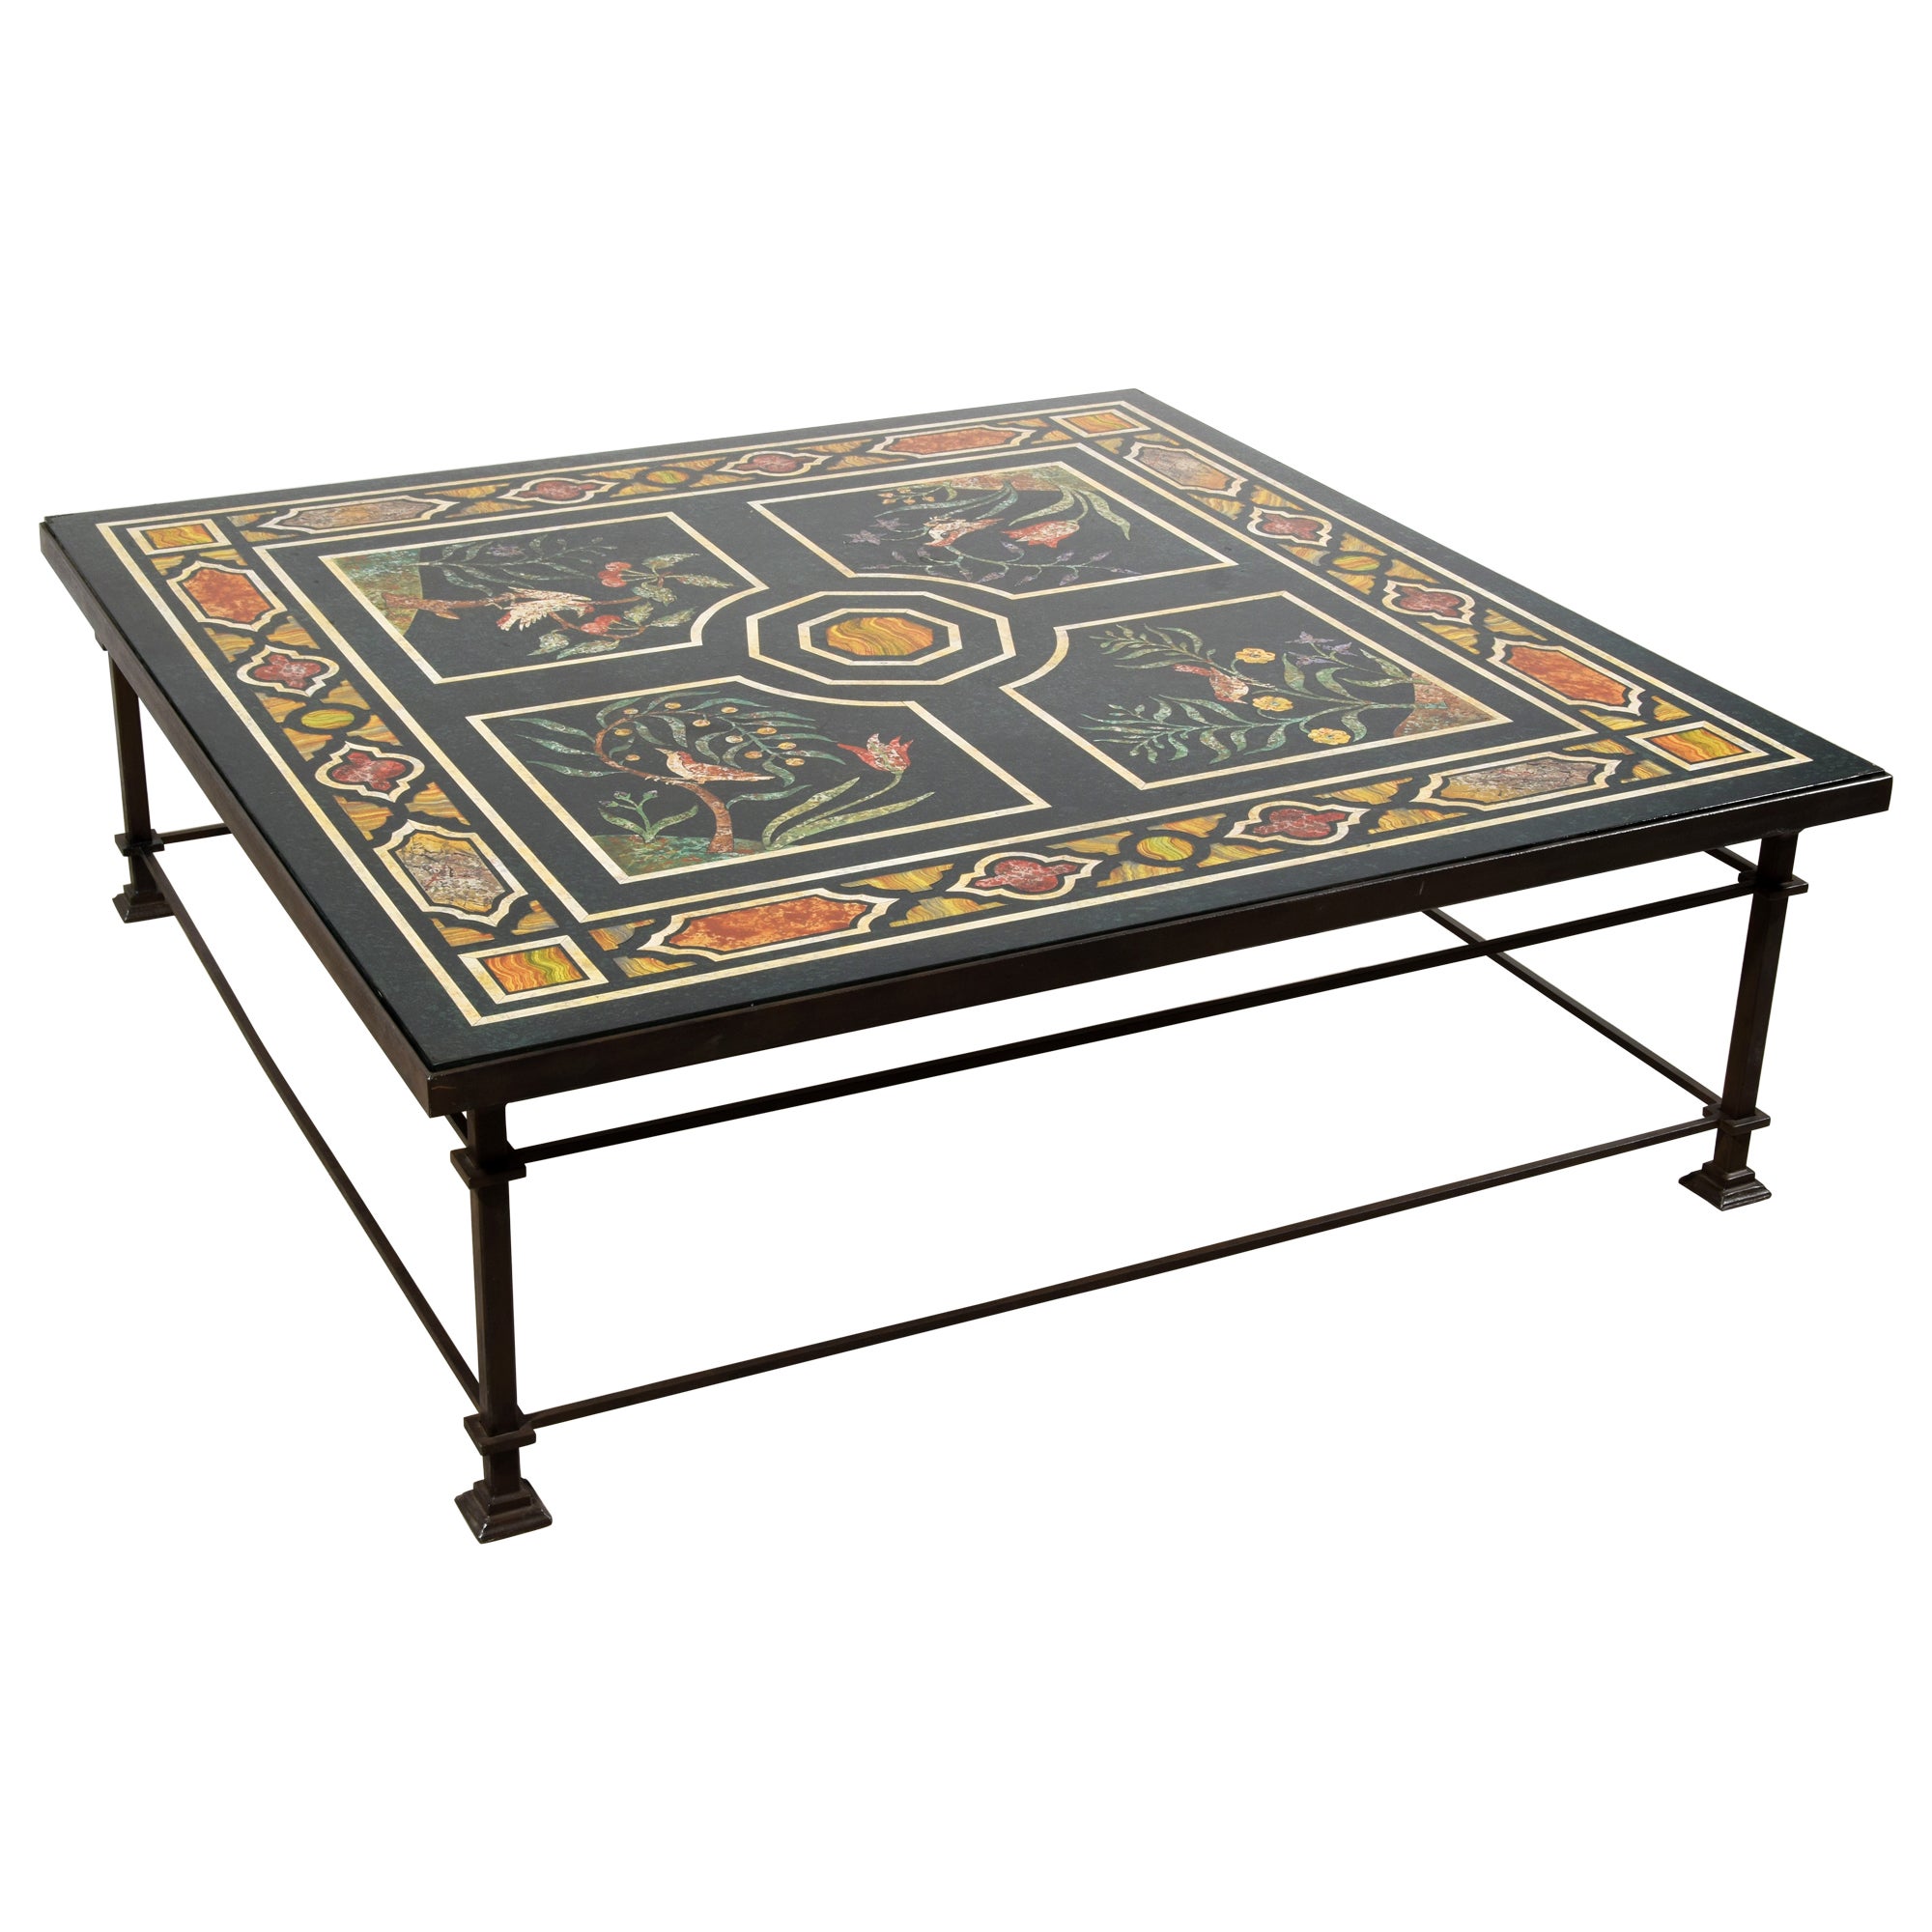  XXth Century, Tuscan Large Square Coffee Table with Lacquered Wood  For Sale